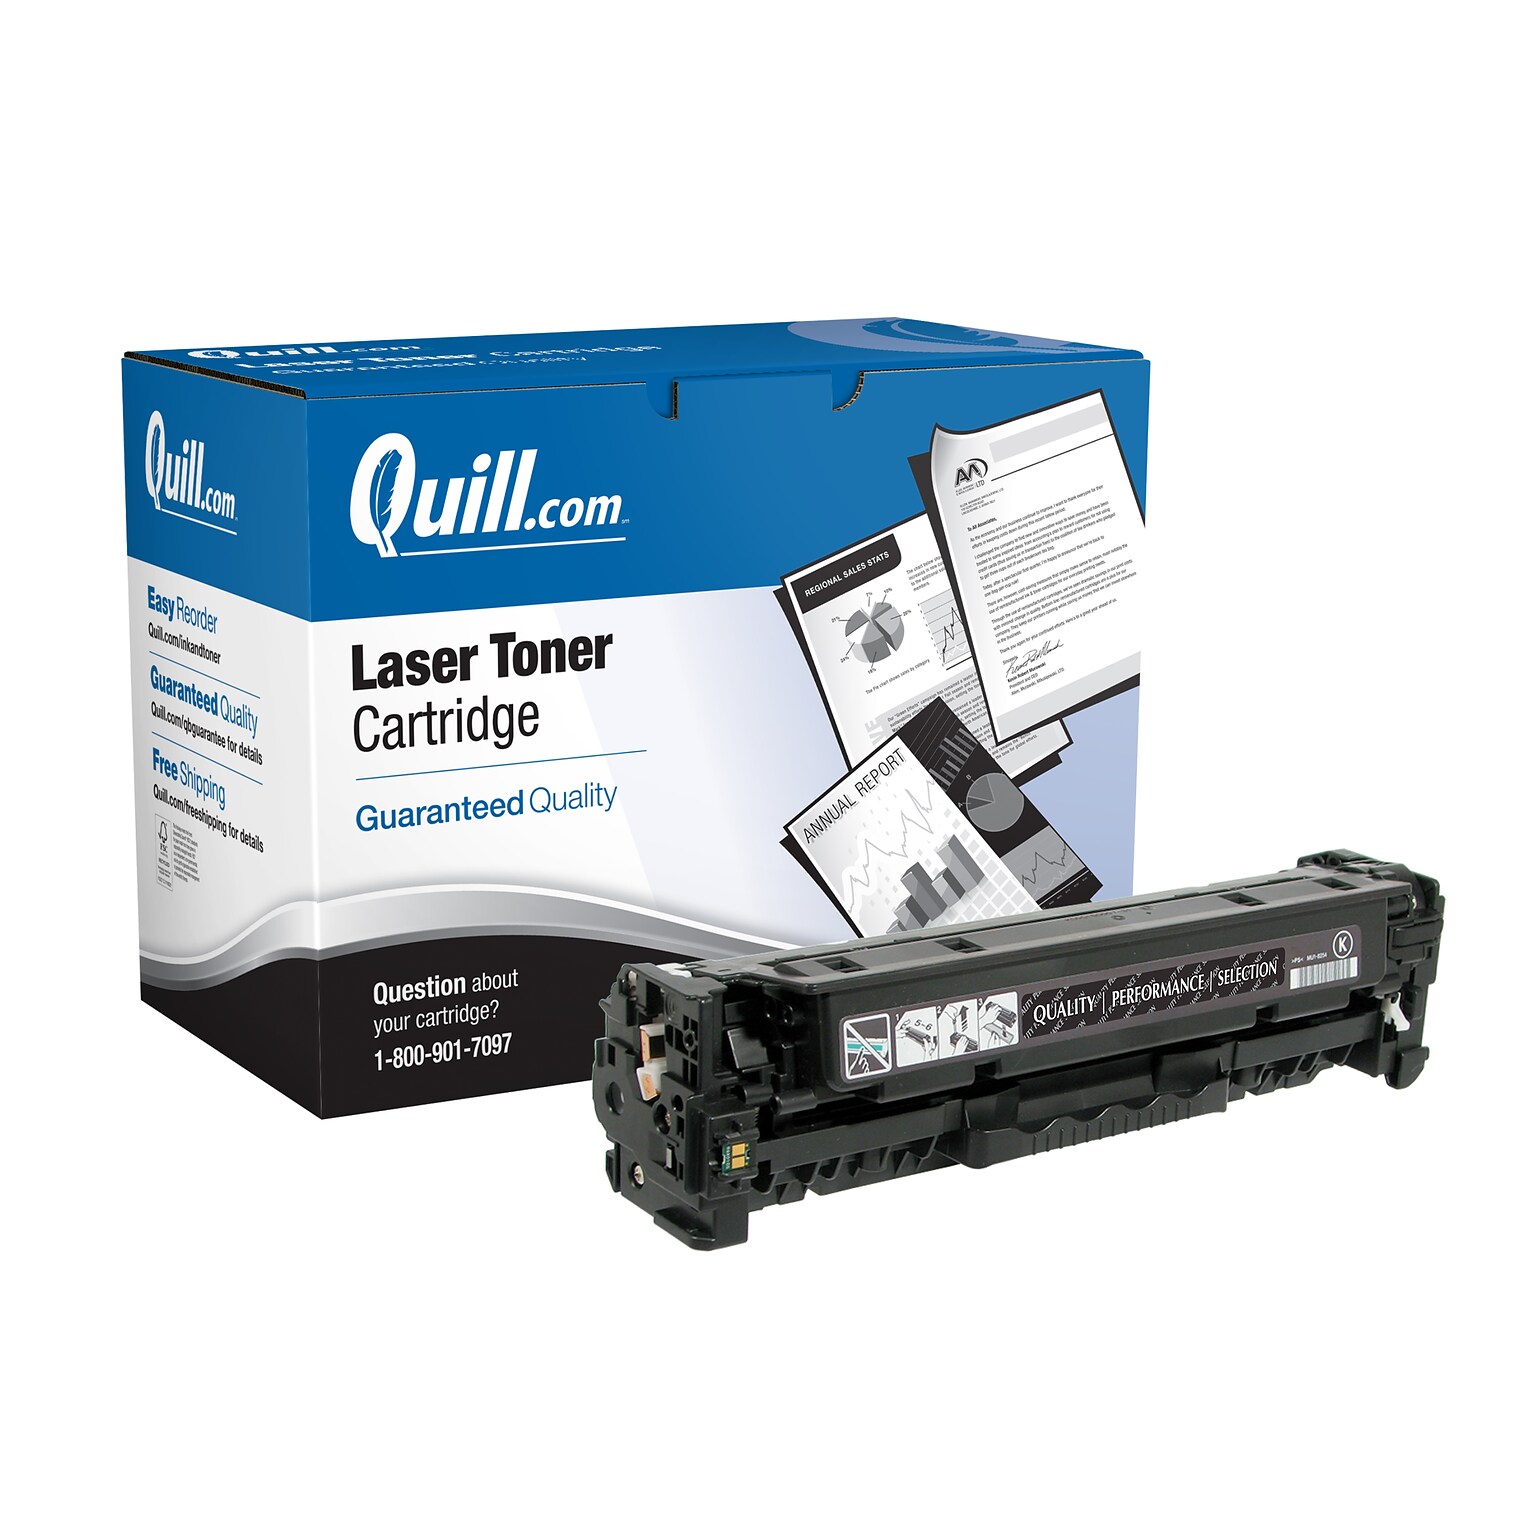 Quill Brand® Remanufactured Black High Yield Toner Cartridge Replacement for HP 305X (CE410X) (Lifetime Warranty)